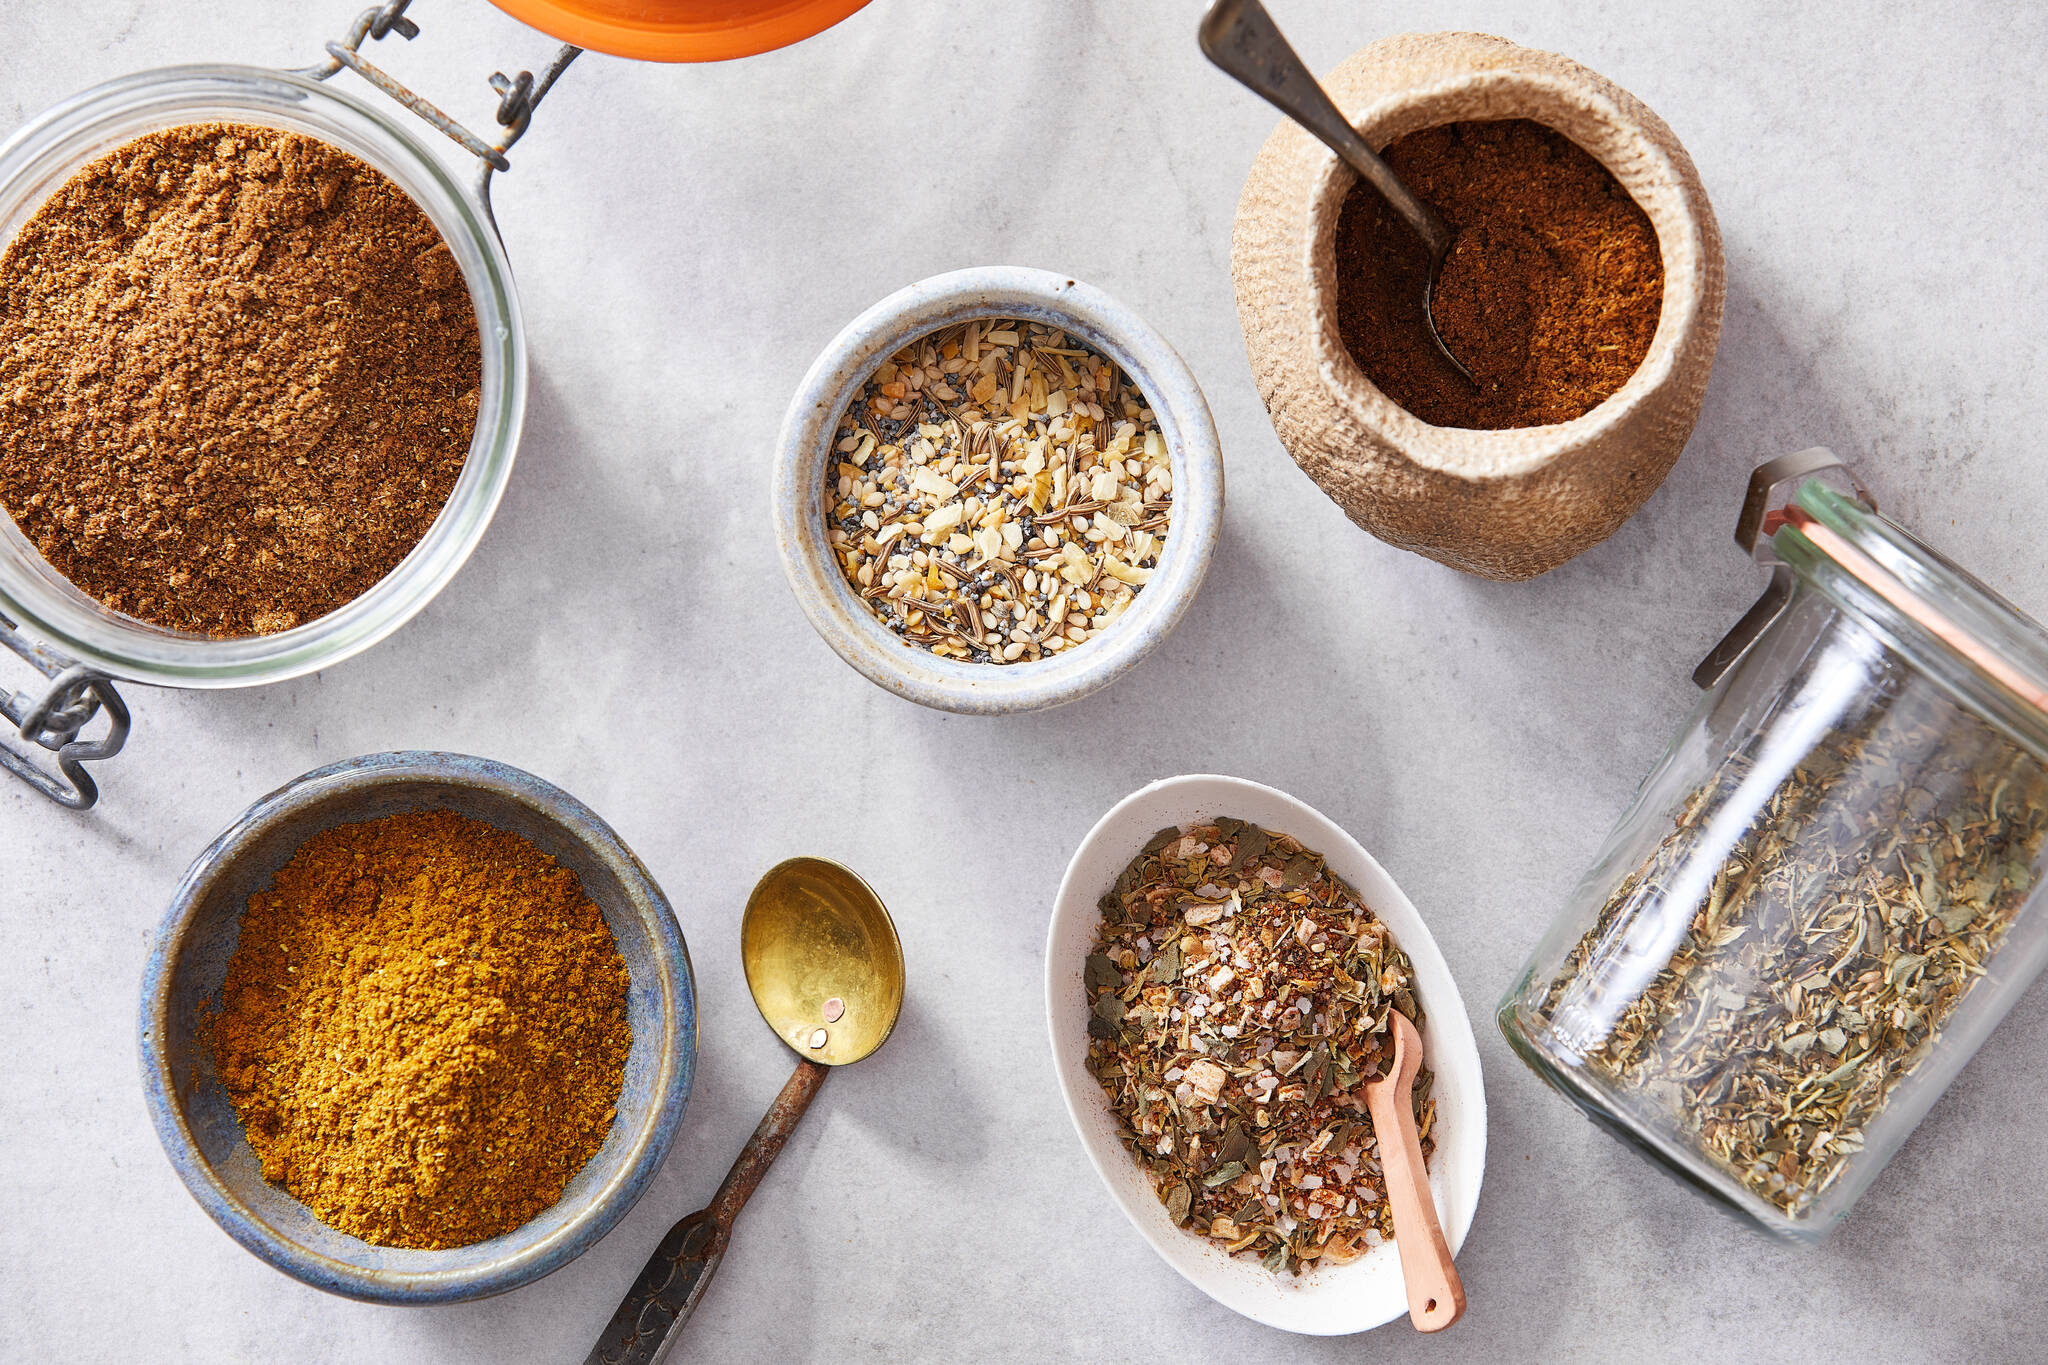 Clockwise from top left: five-spice powder, everything spice, garam masala, Italian seasoning, Cajun/Creole seasoning and ras el hanout. Friday, June 10, 2022 is Herbs and Spices Day. (Photo for The Washington Post by Tom McCorkle)